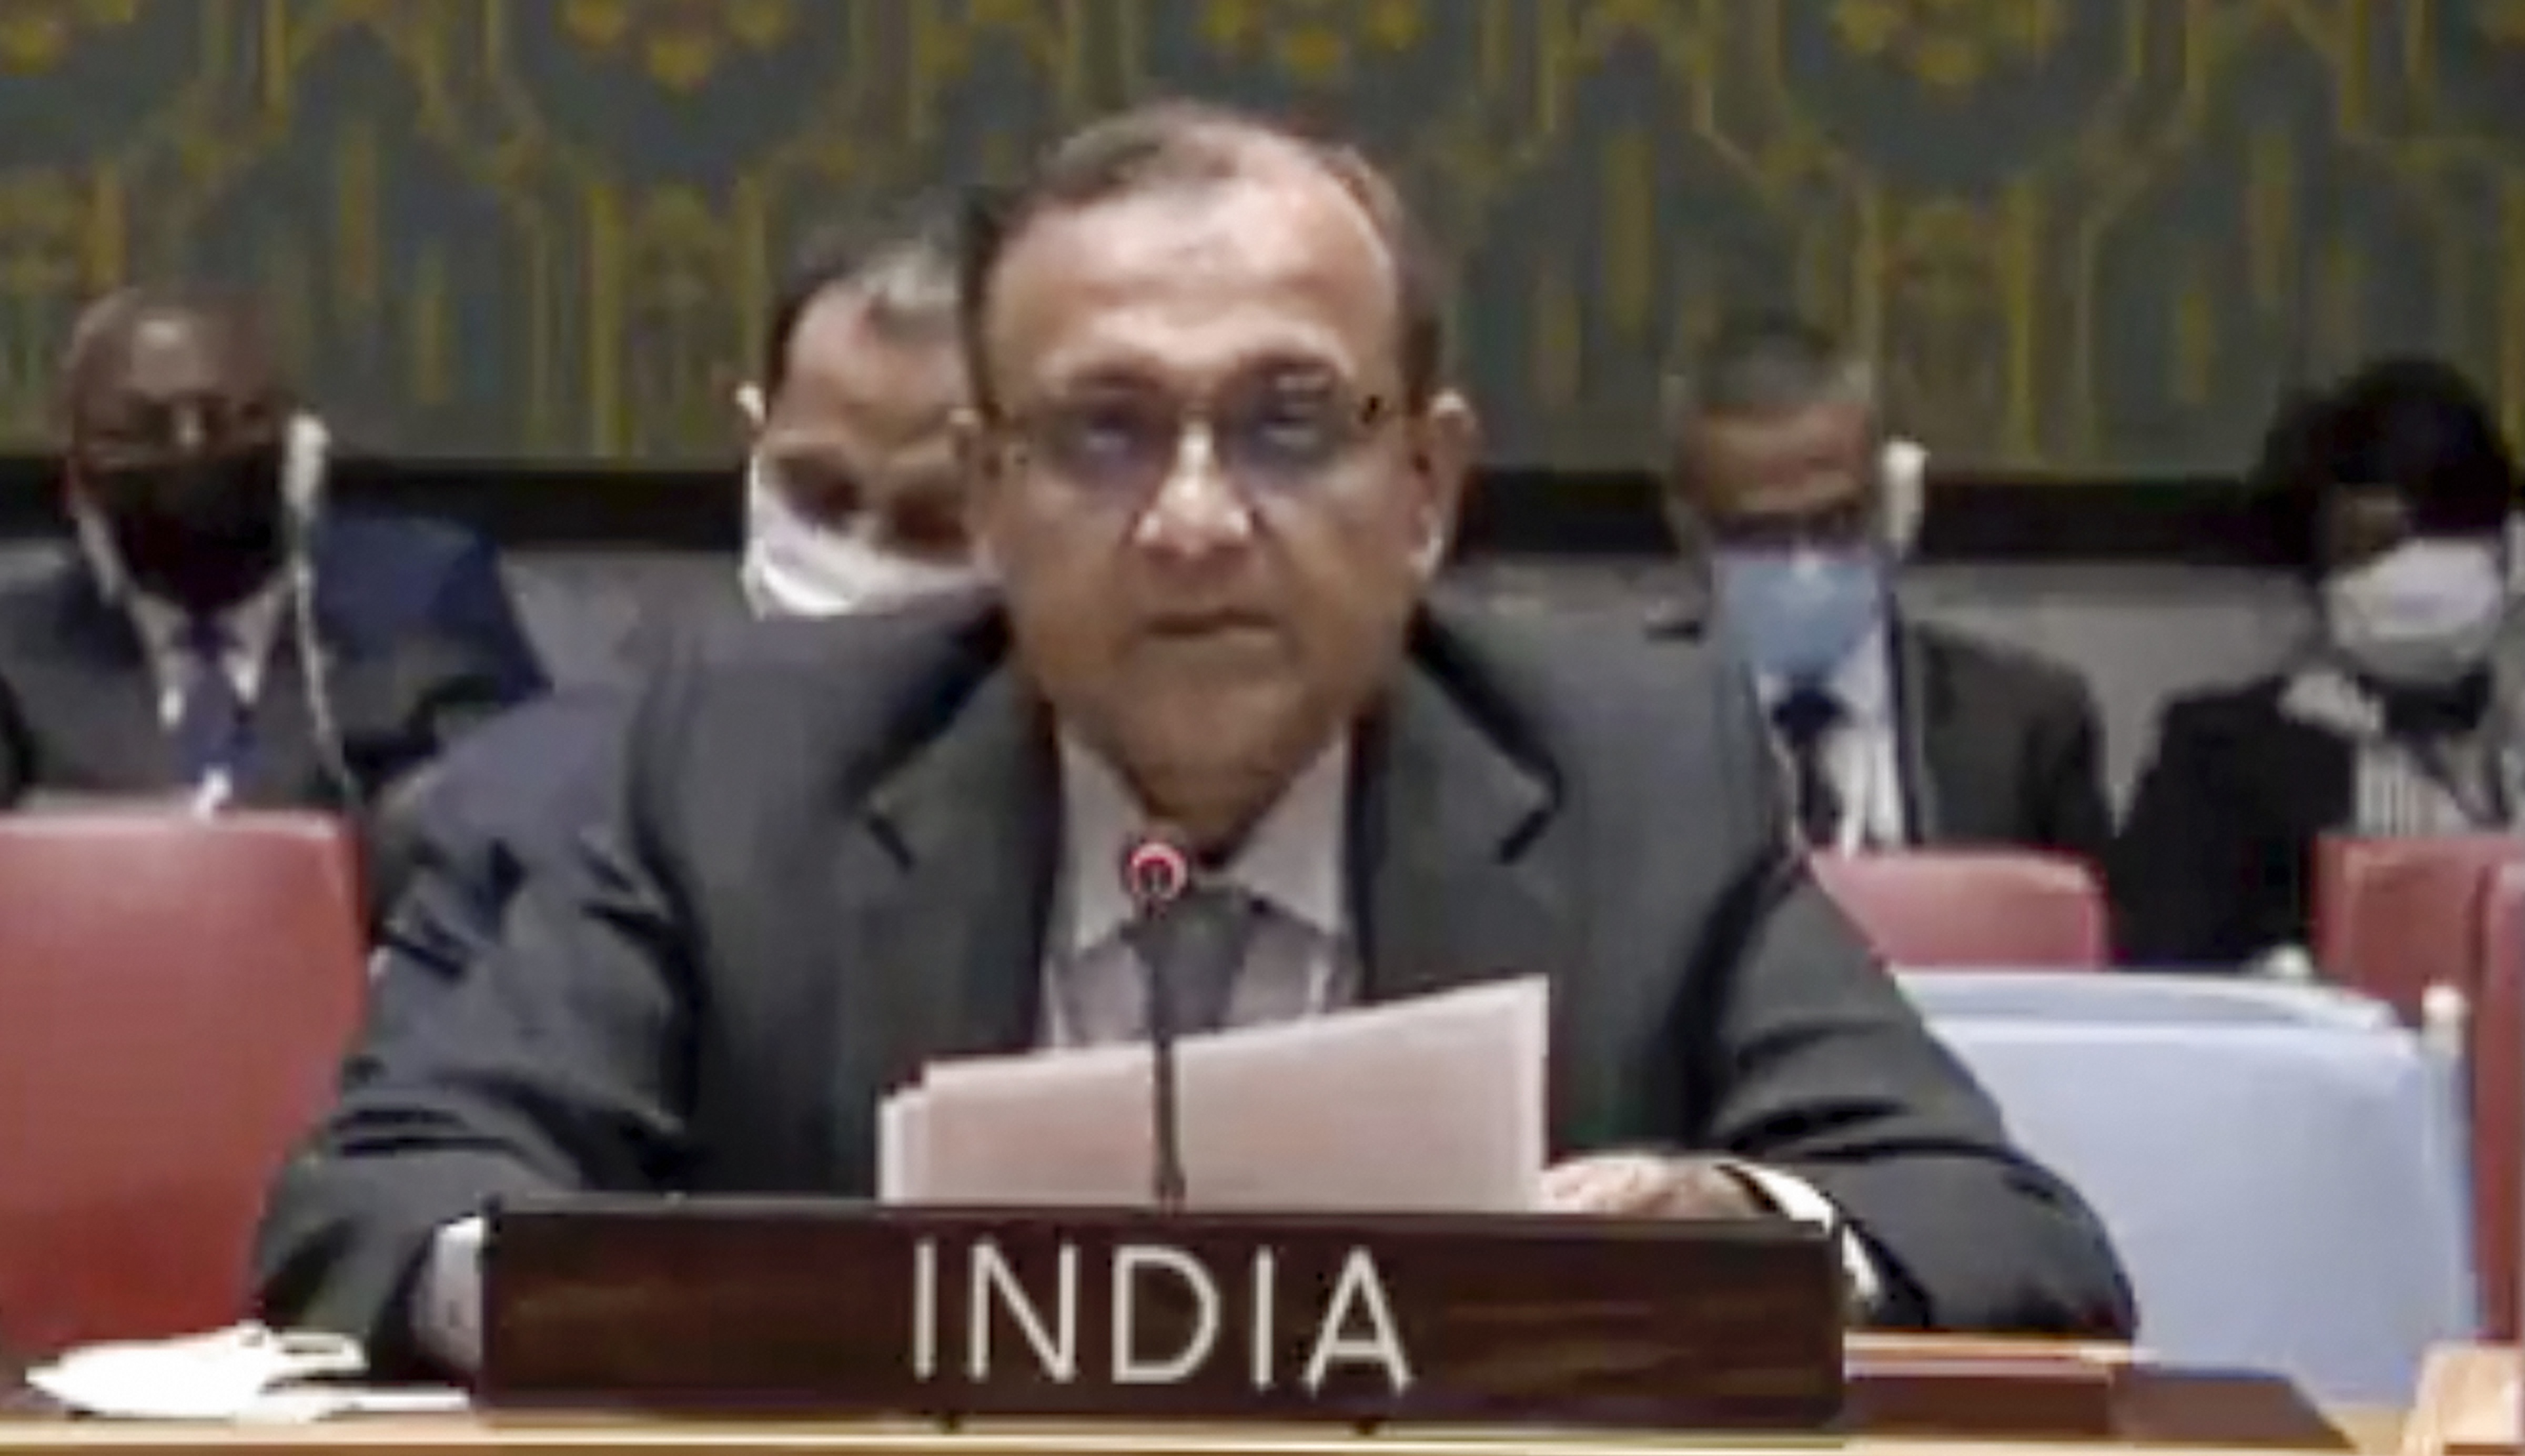 There cannot be 'double standards' on religiophobia: India at UN